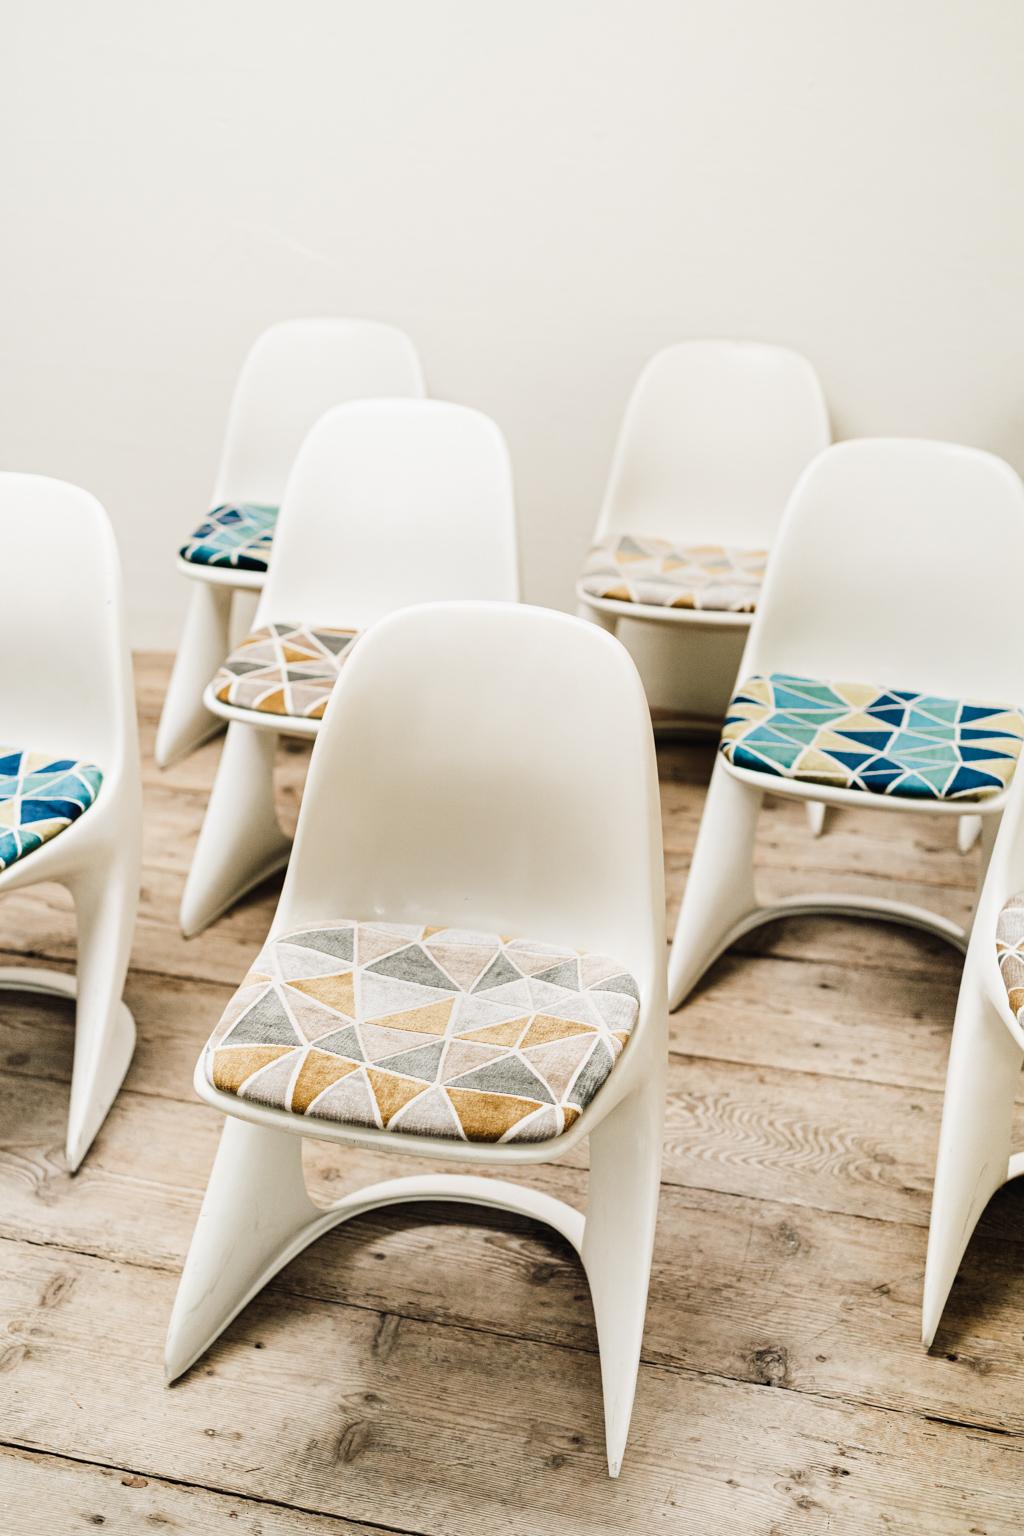 This set of 8 plastic chairs was designed by Alexander Begge in 1971 and manufactured by Casala, Germany. The model Casalino's have ivory colored frames and seats covered with the original fabric.